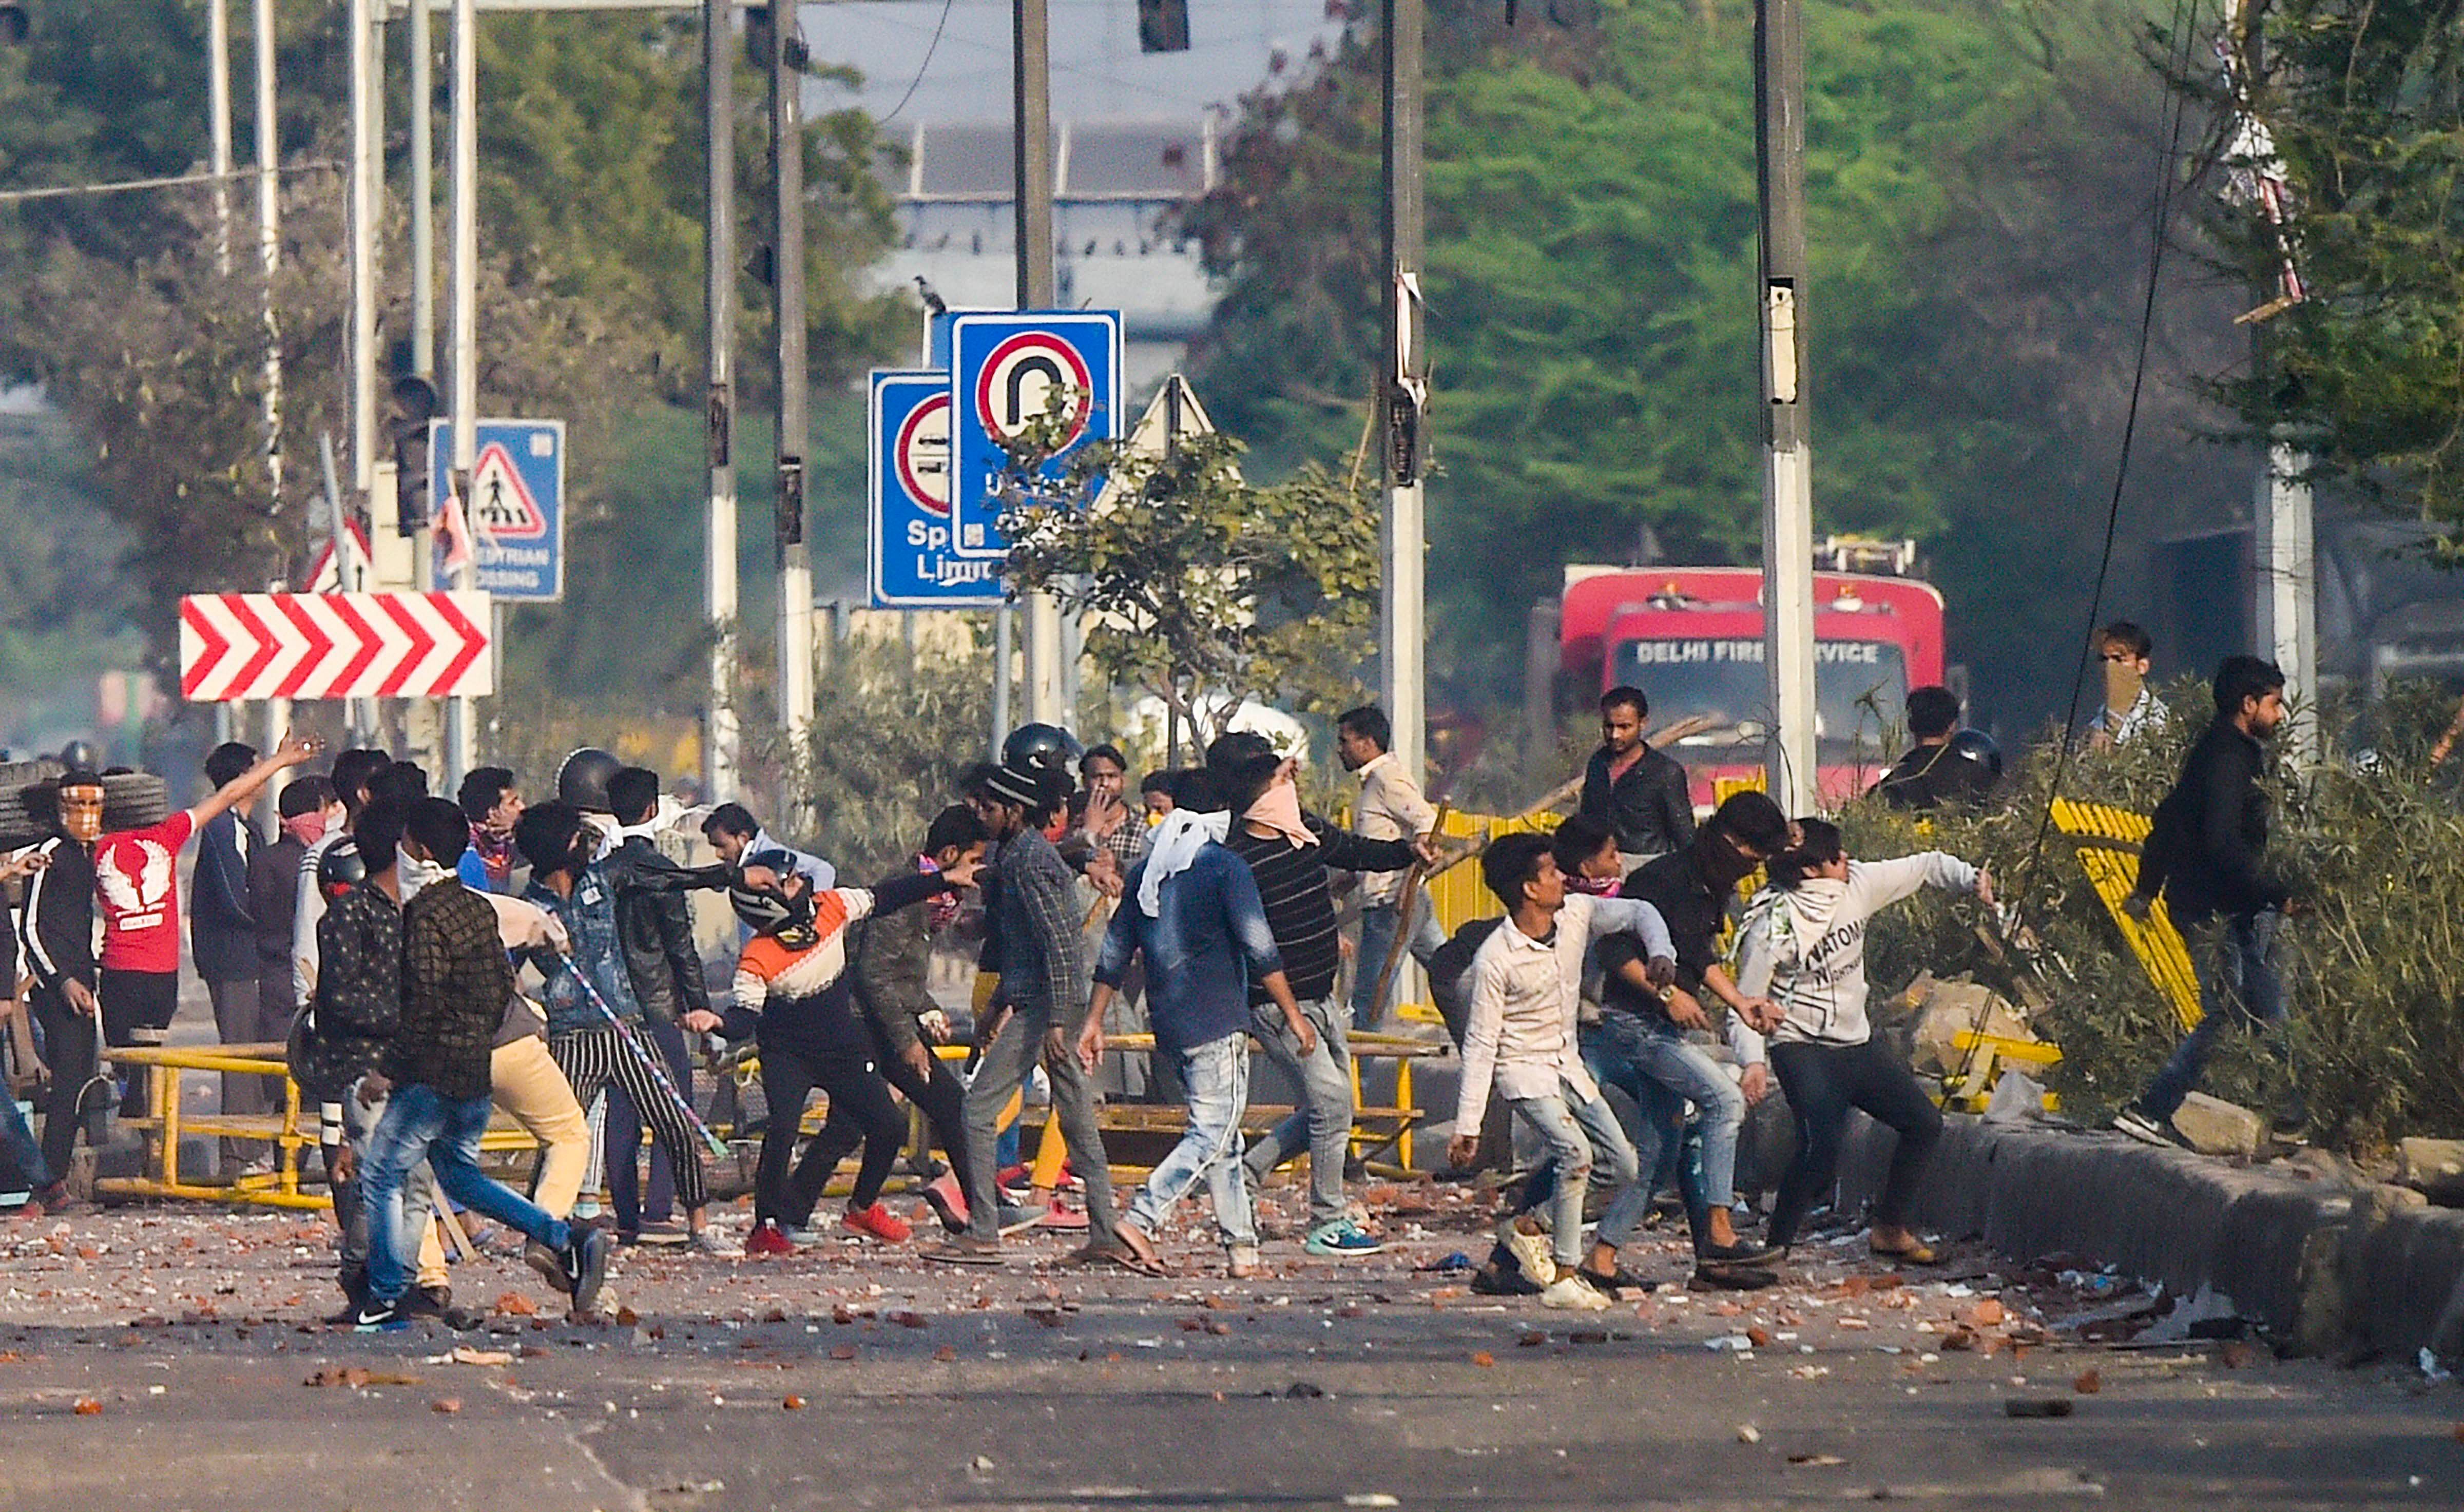 Rioters pelt stones during clashes between those against and those supporting the Citizenship (Amendment) Act in north east Delhi, Tuesday, Feb. 25, 2020. The violence that started on Monday spread to many parts of north east Delhi, leading to death of nine people and injuries to many including police personnel. (PTI Photo)